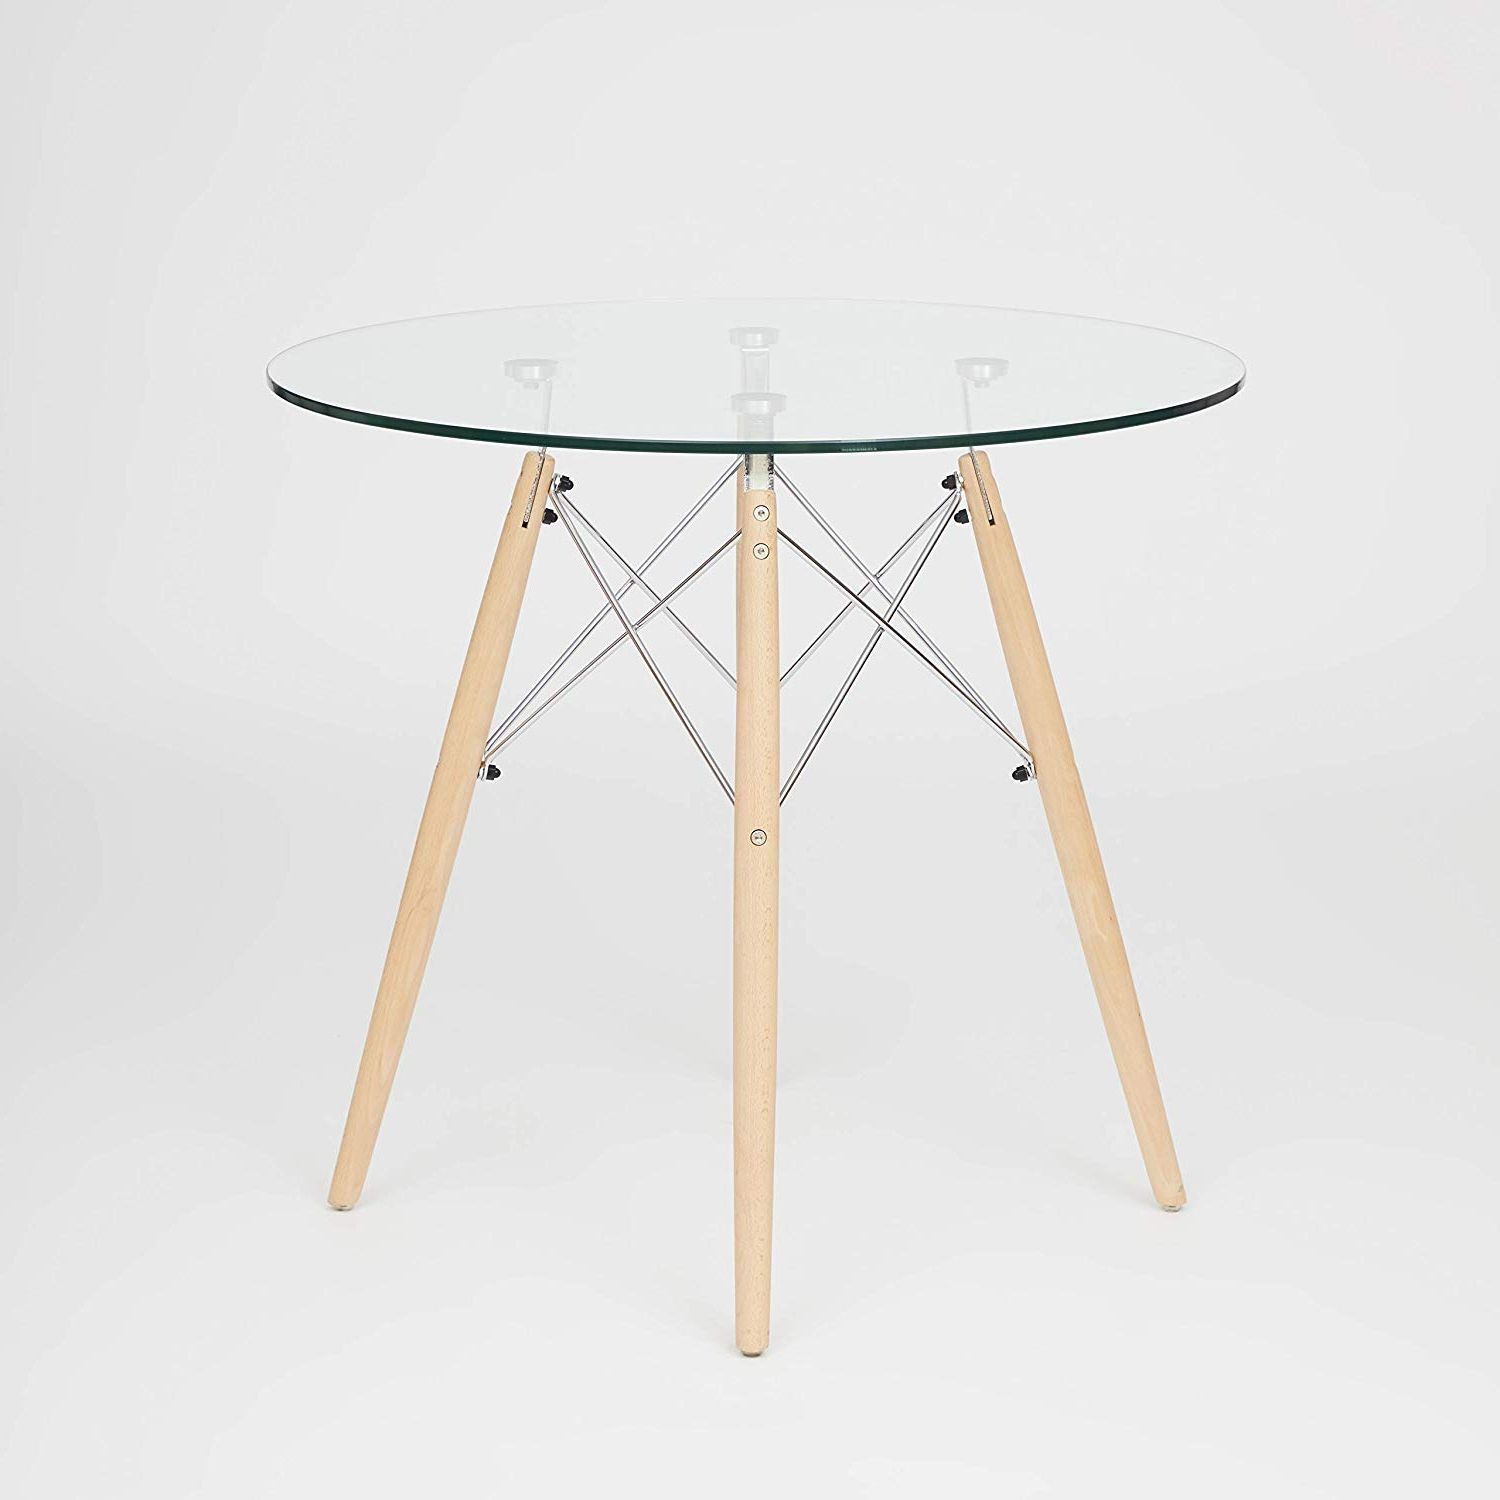 Ochs Dsw Style Dining Round Table Glass Top With Natural Intended For Well Liked Eames Style Dining Tables With Chromed Leg And Tempered Glass Top (View 6 of 25)